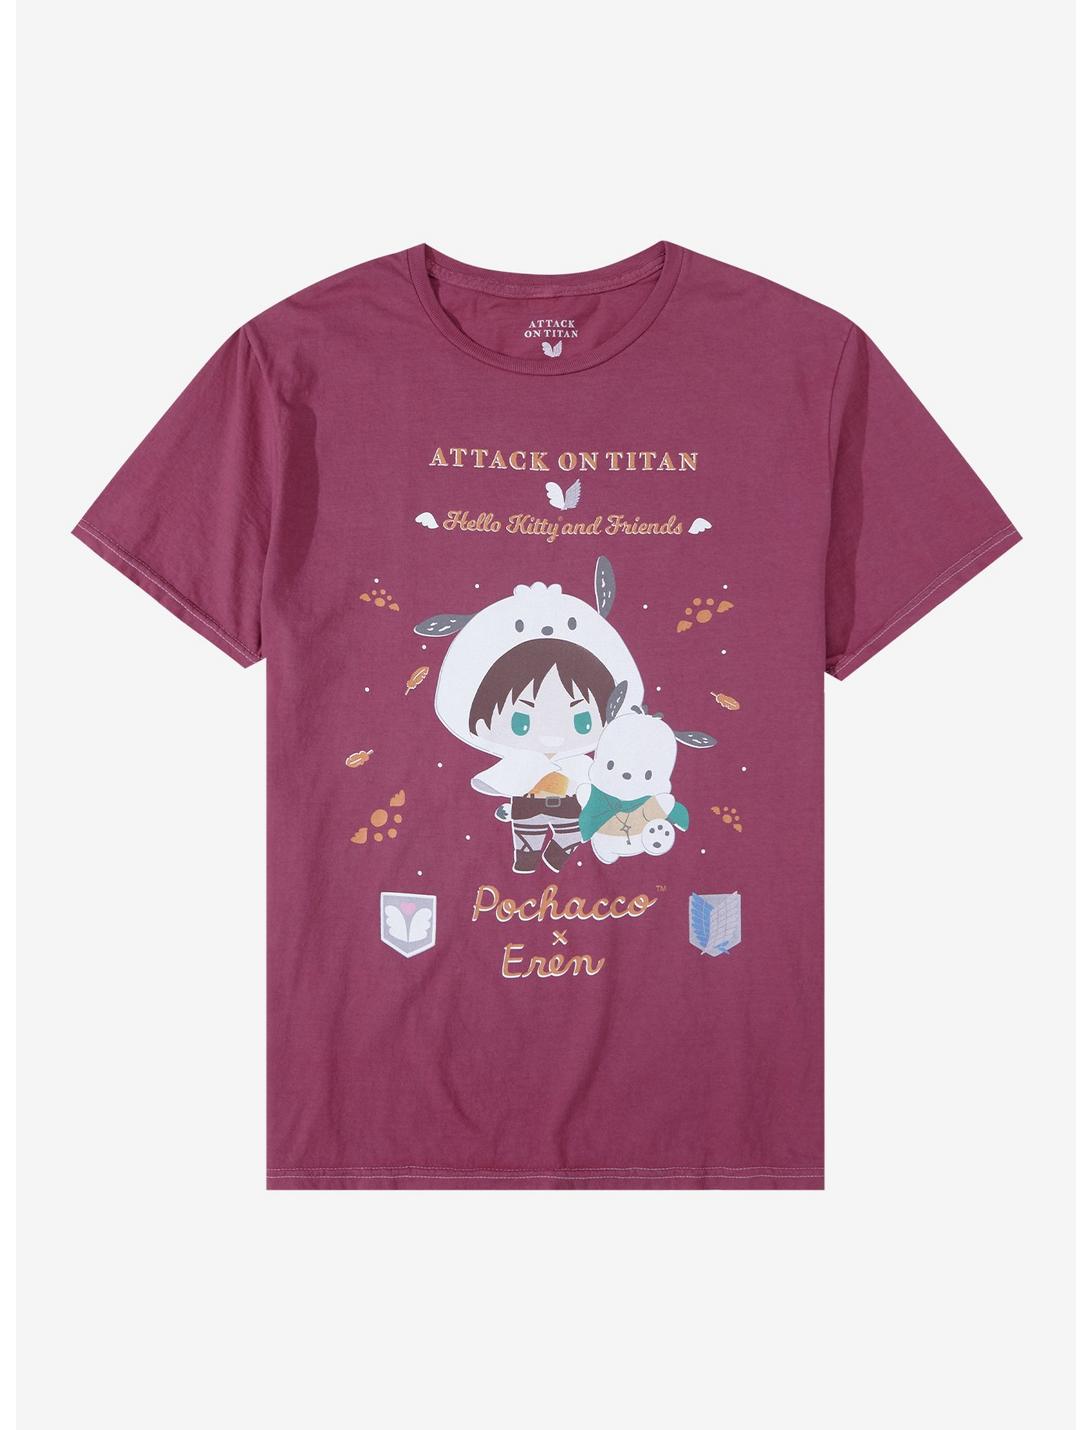 Attack On Titan X Hello Kitty And Friends Pochacco & Eren T-Shirt, MAROON, hi-res